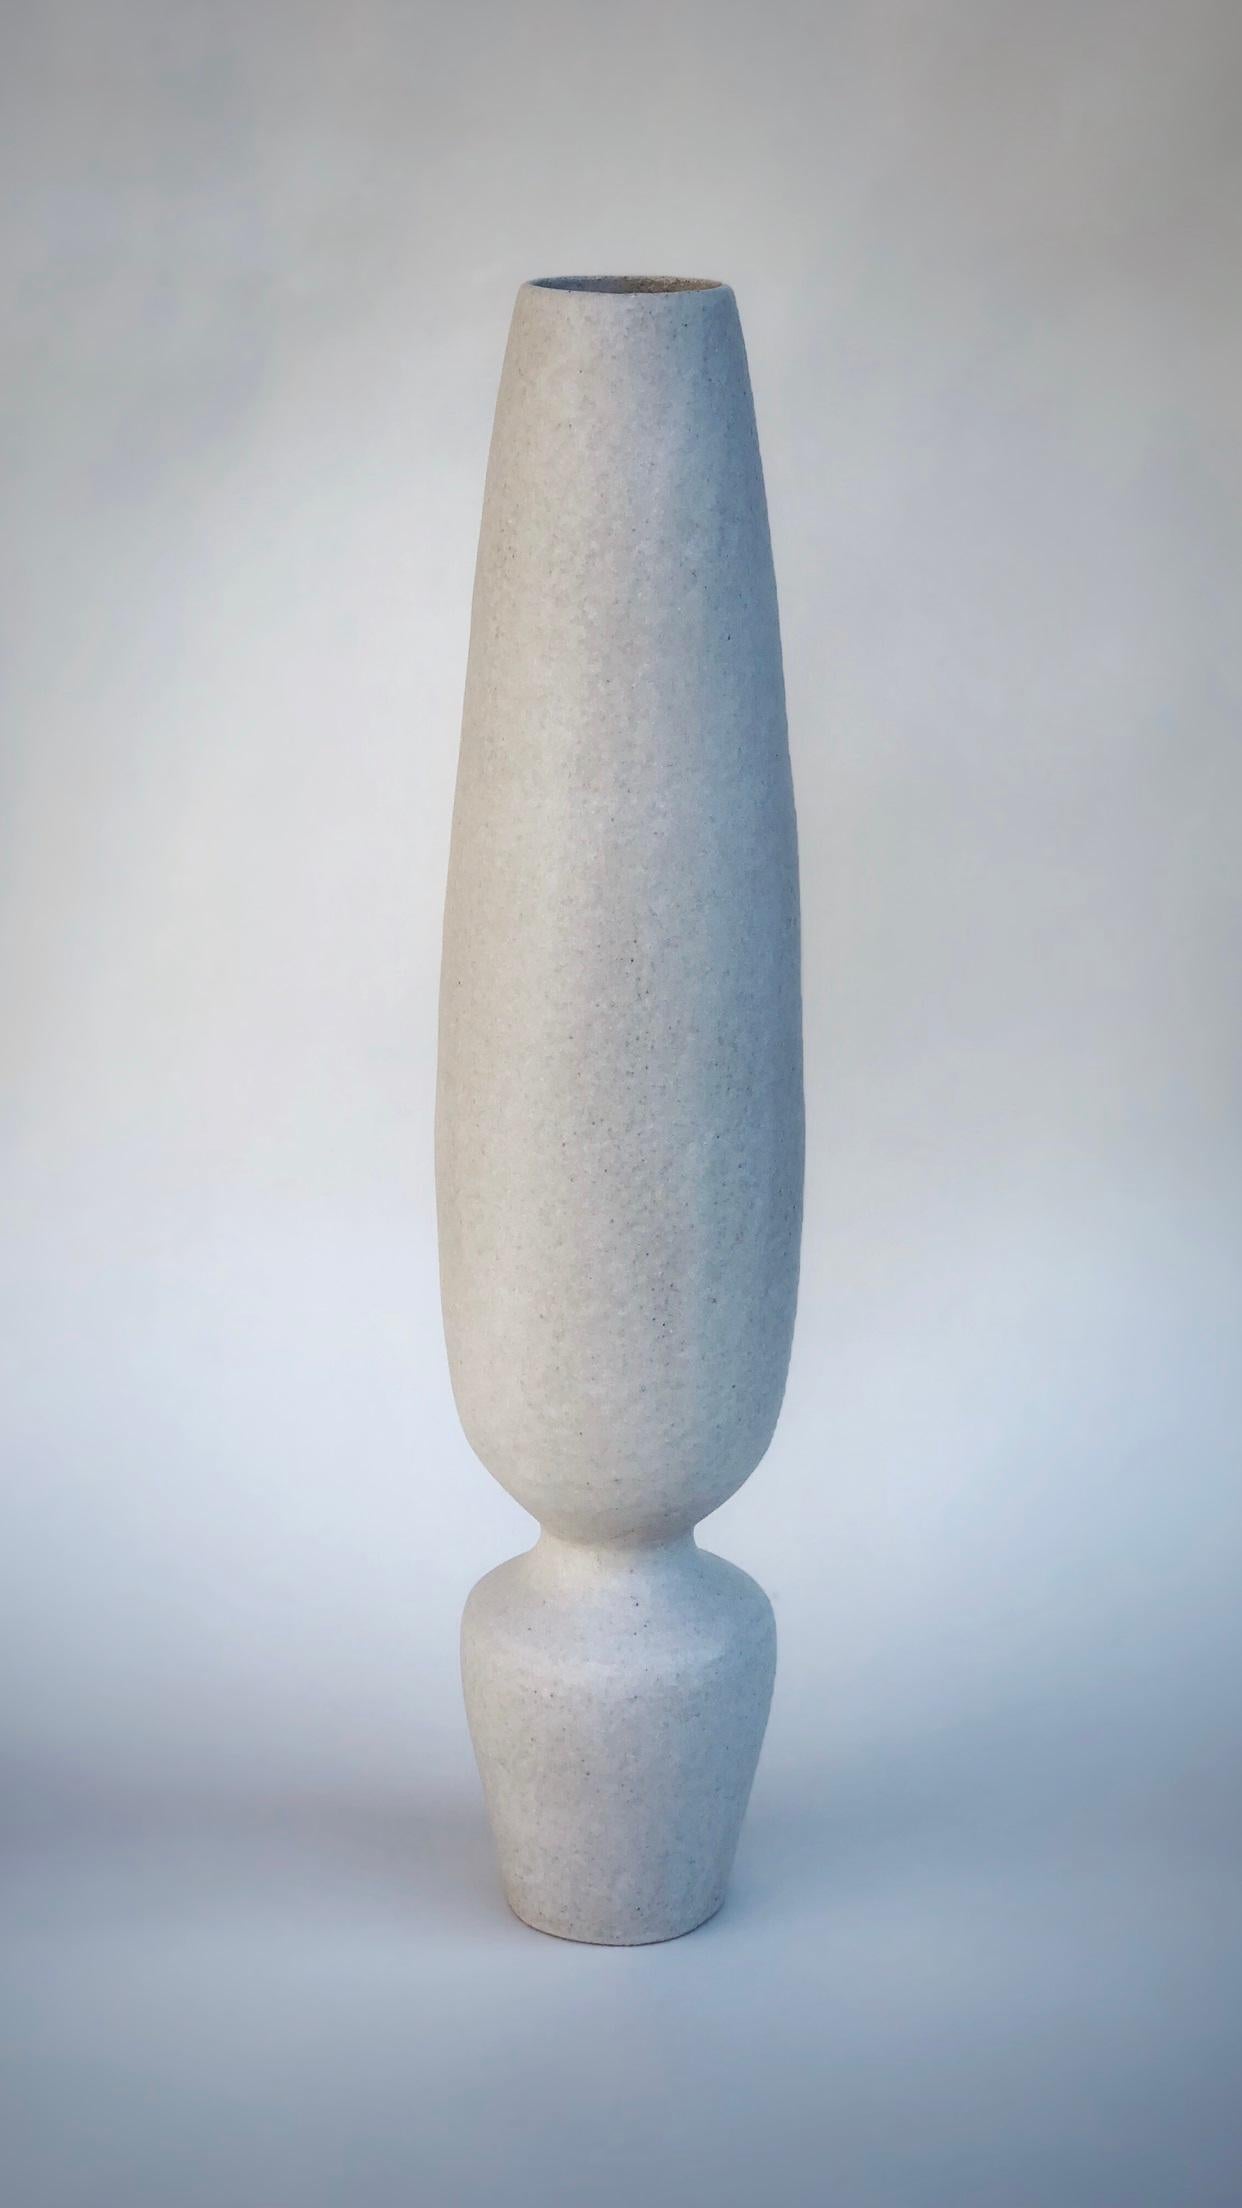 Silhouette Vase by Sophie Vaidie
One Of A Kind.
Dimensions: Ø 11 x H 58 cm. 
Materials: Beige stoneware with white mat glaze.

In the beginning, there was a need to make, with the hands, the touch, the senses. Then came the desire to create and